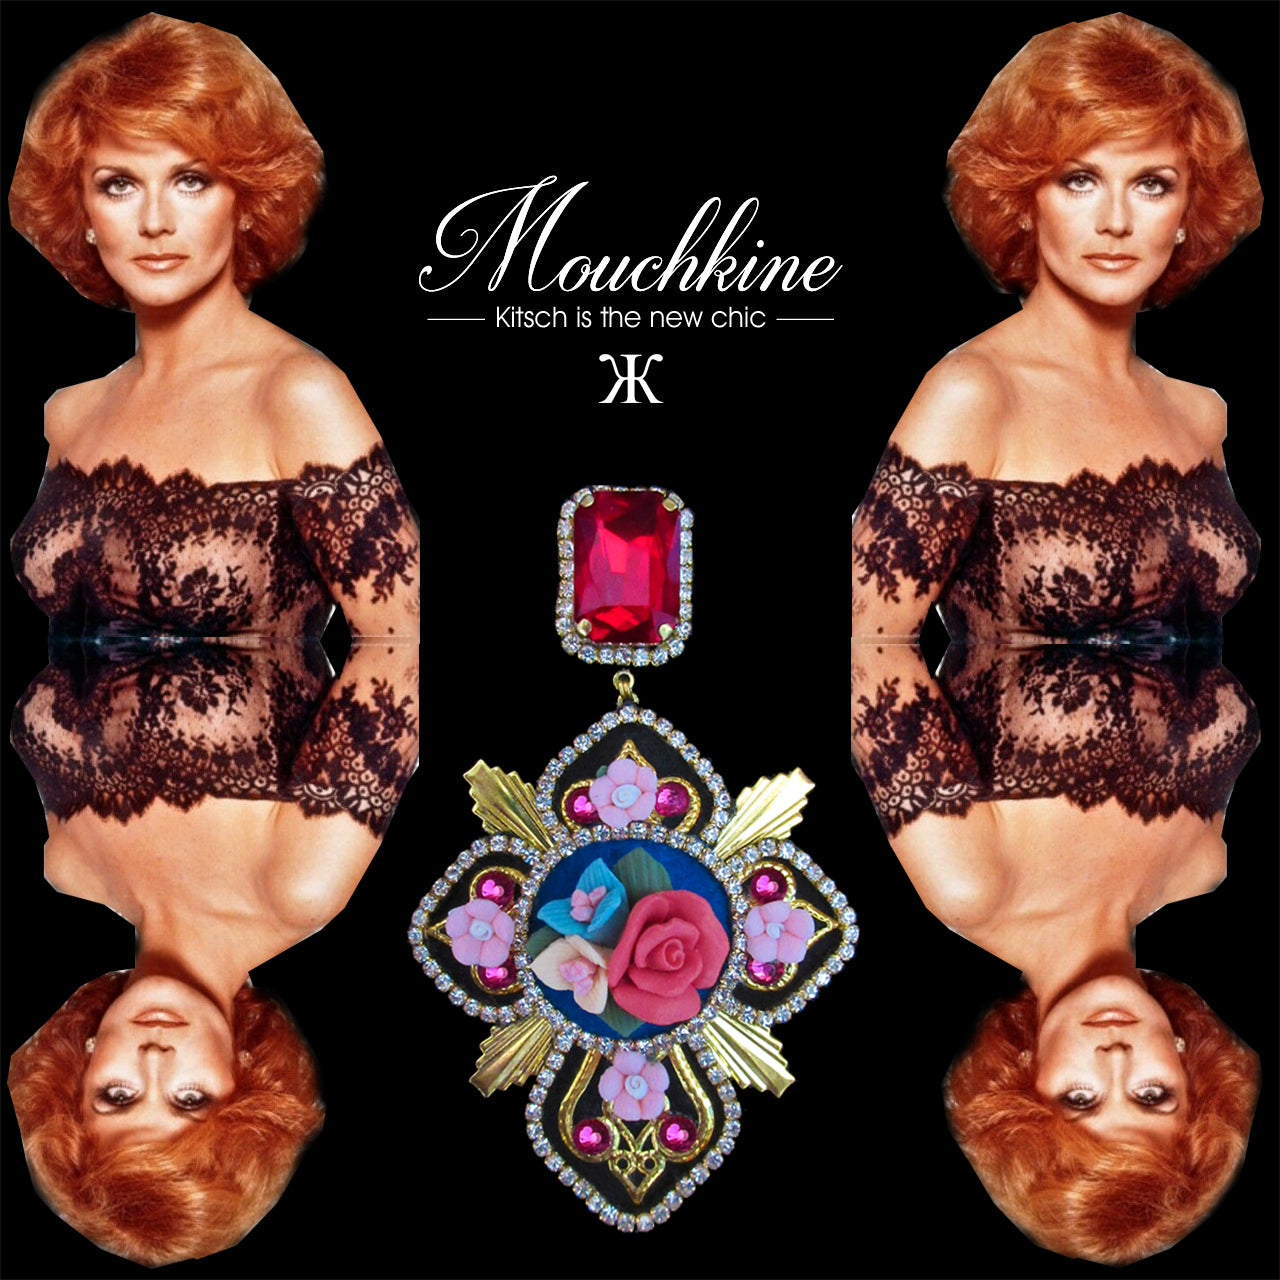 mouchkine jewelry bijoux earrings kitsch blingbling chic elegance flowers couture